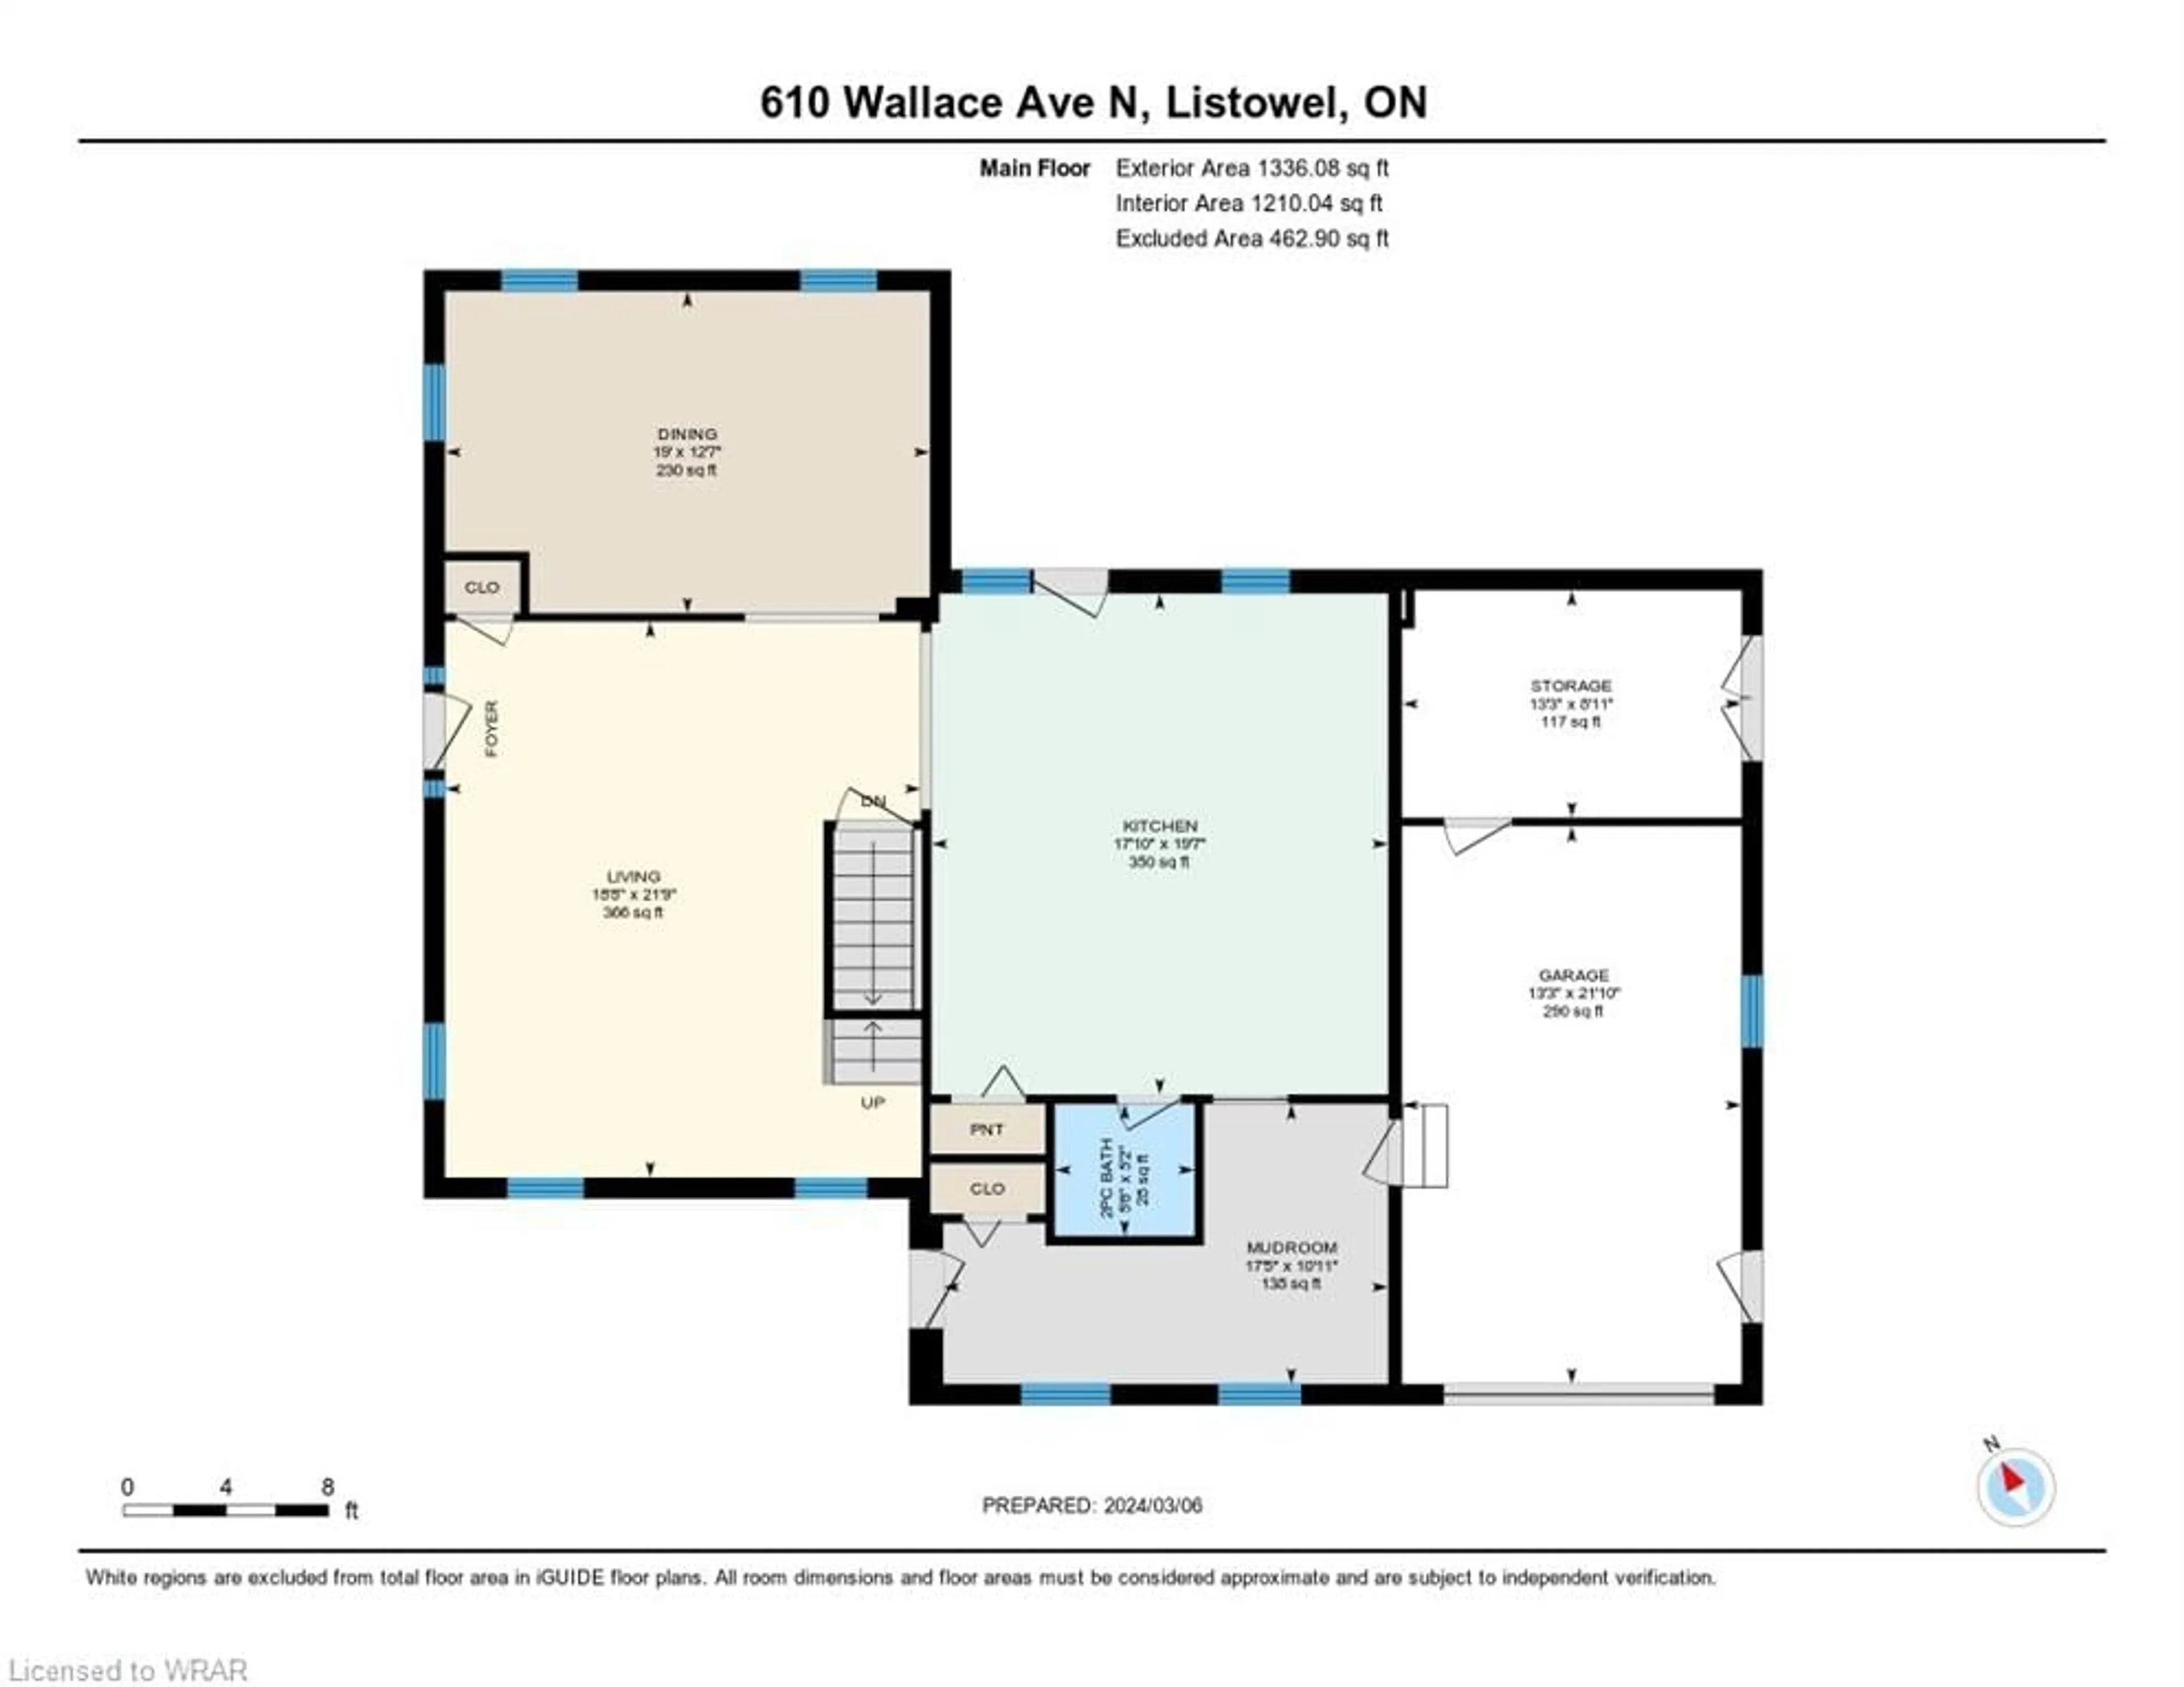 Floor plan for 610 Wallace Ave, Listowel Ontario N4W 1M1